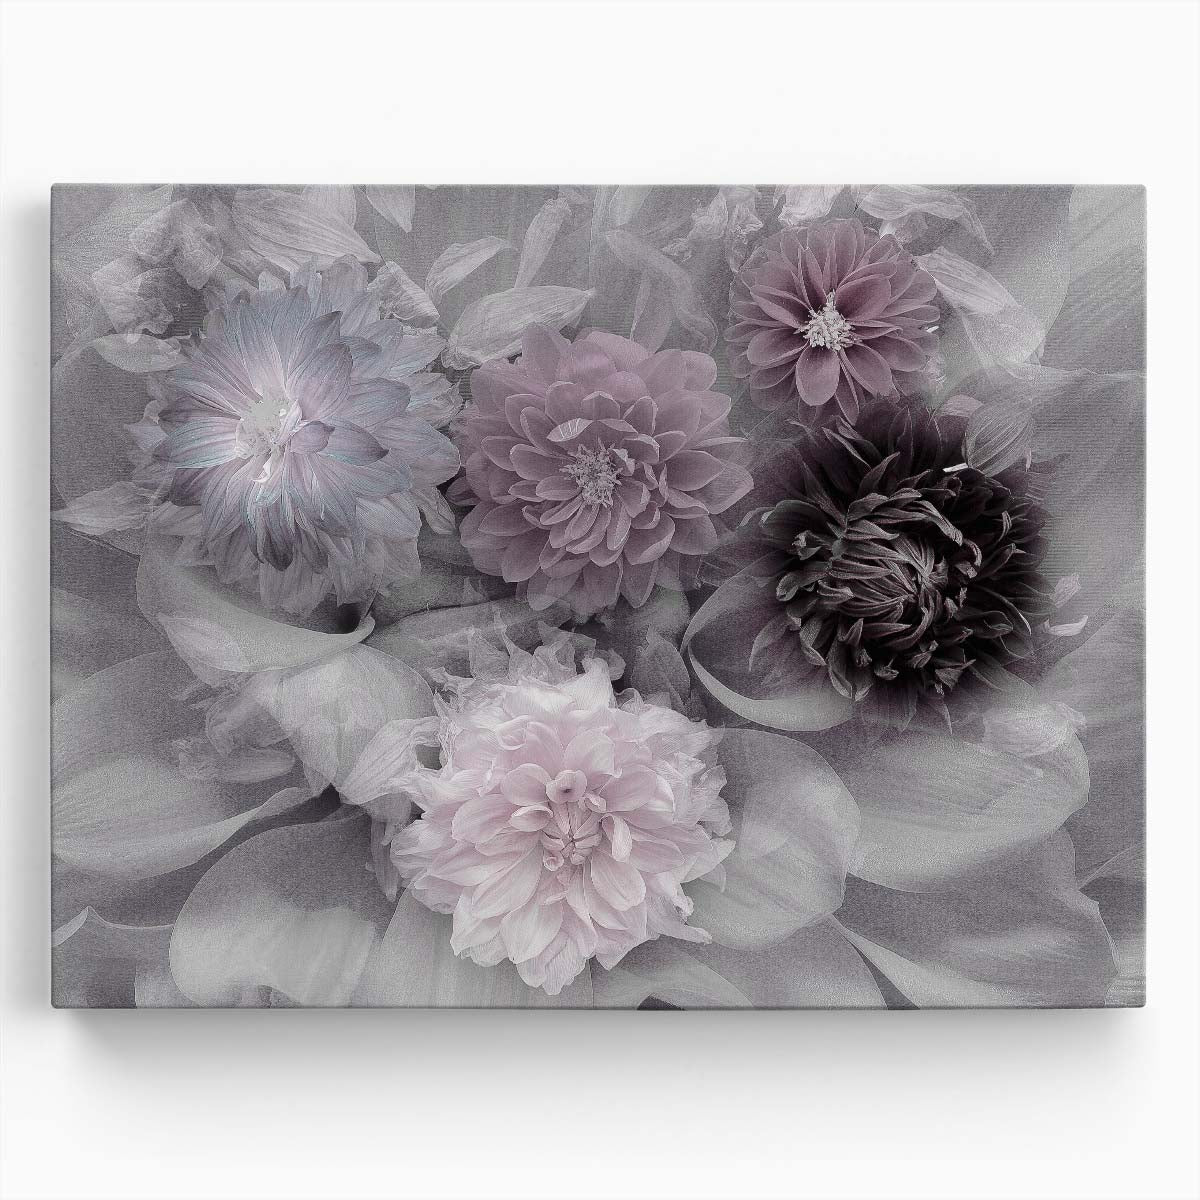 Double Exposure Purple Dahlia Macro Floral Photography Wall Art by Luxuriance Designs. Made in USA.